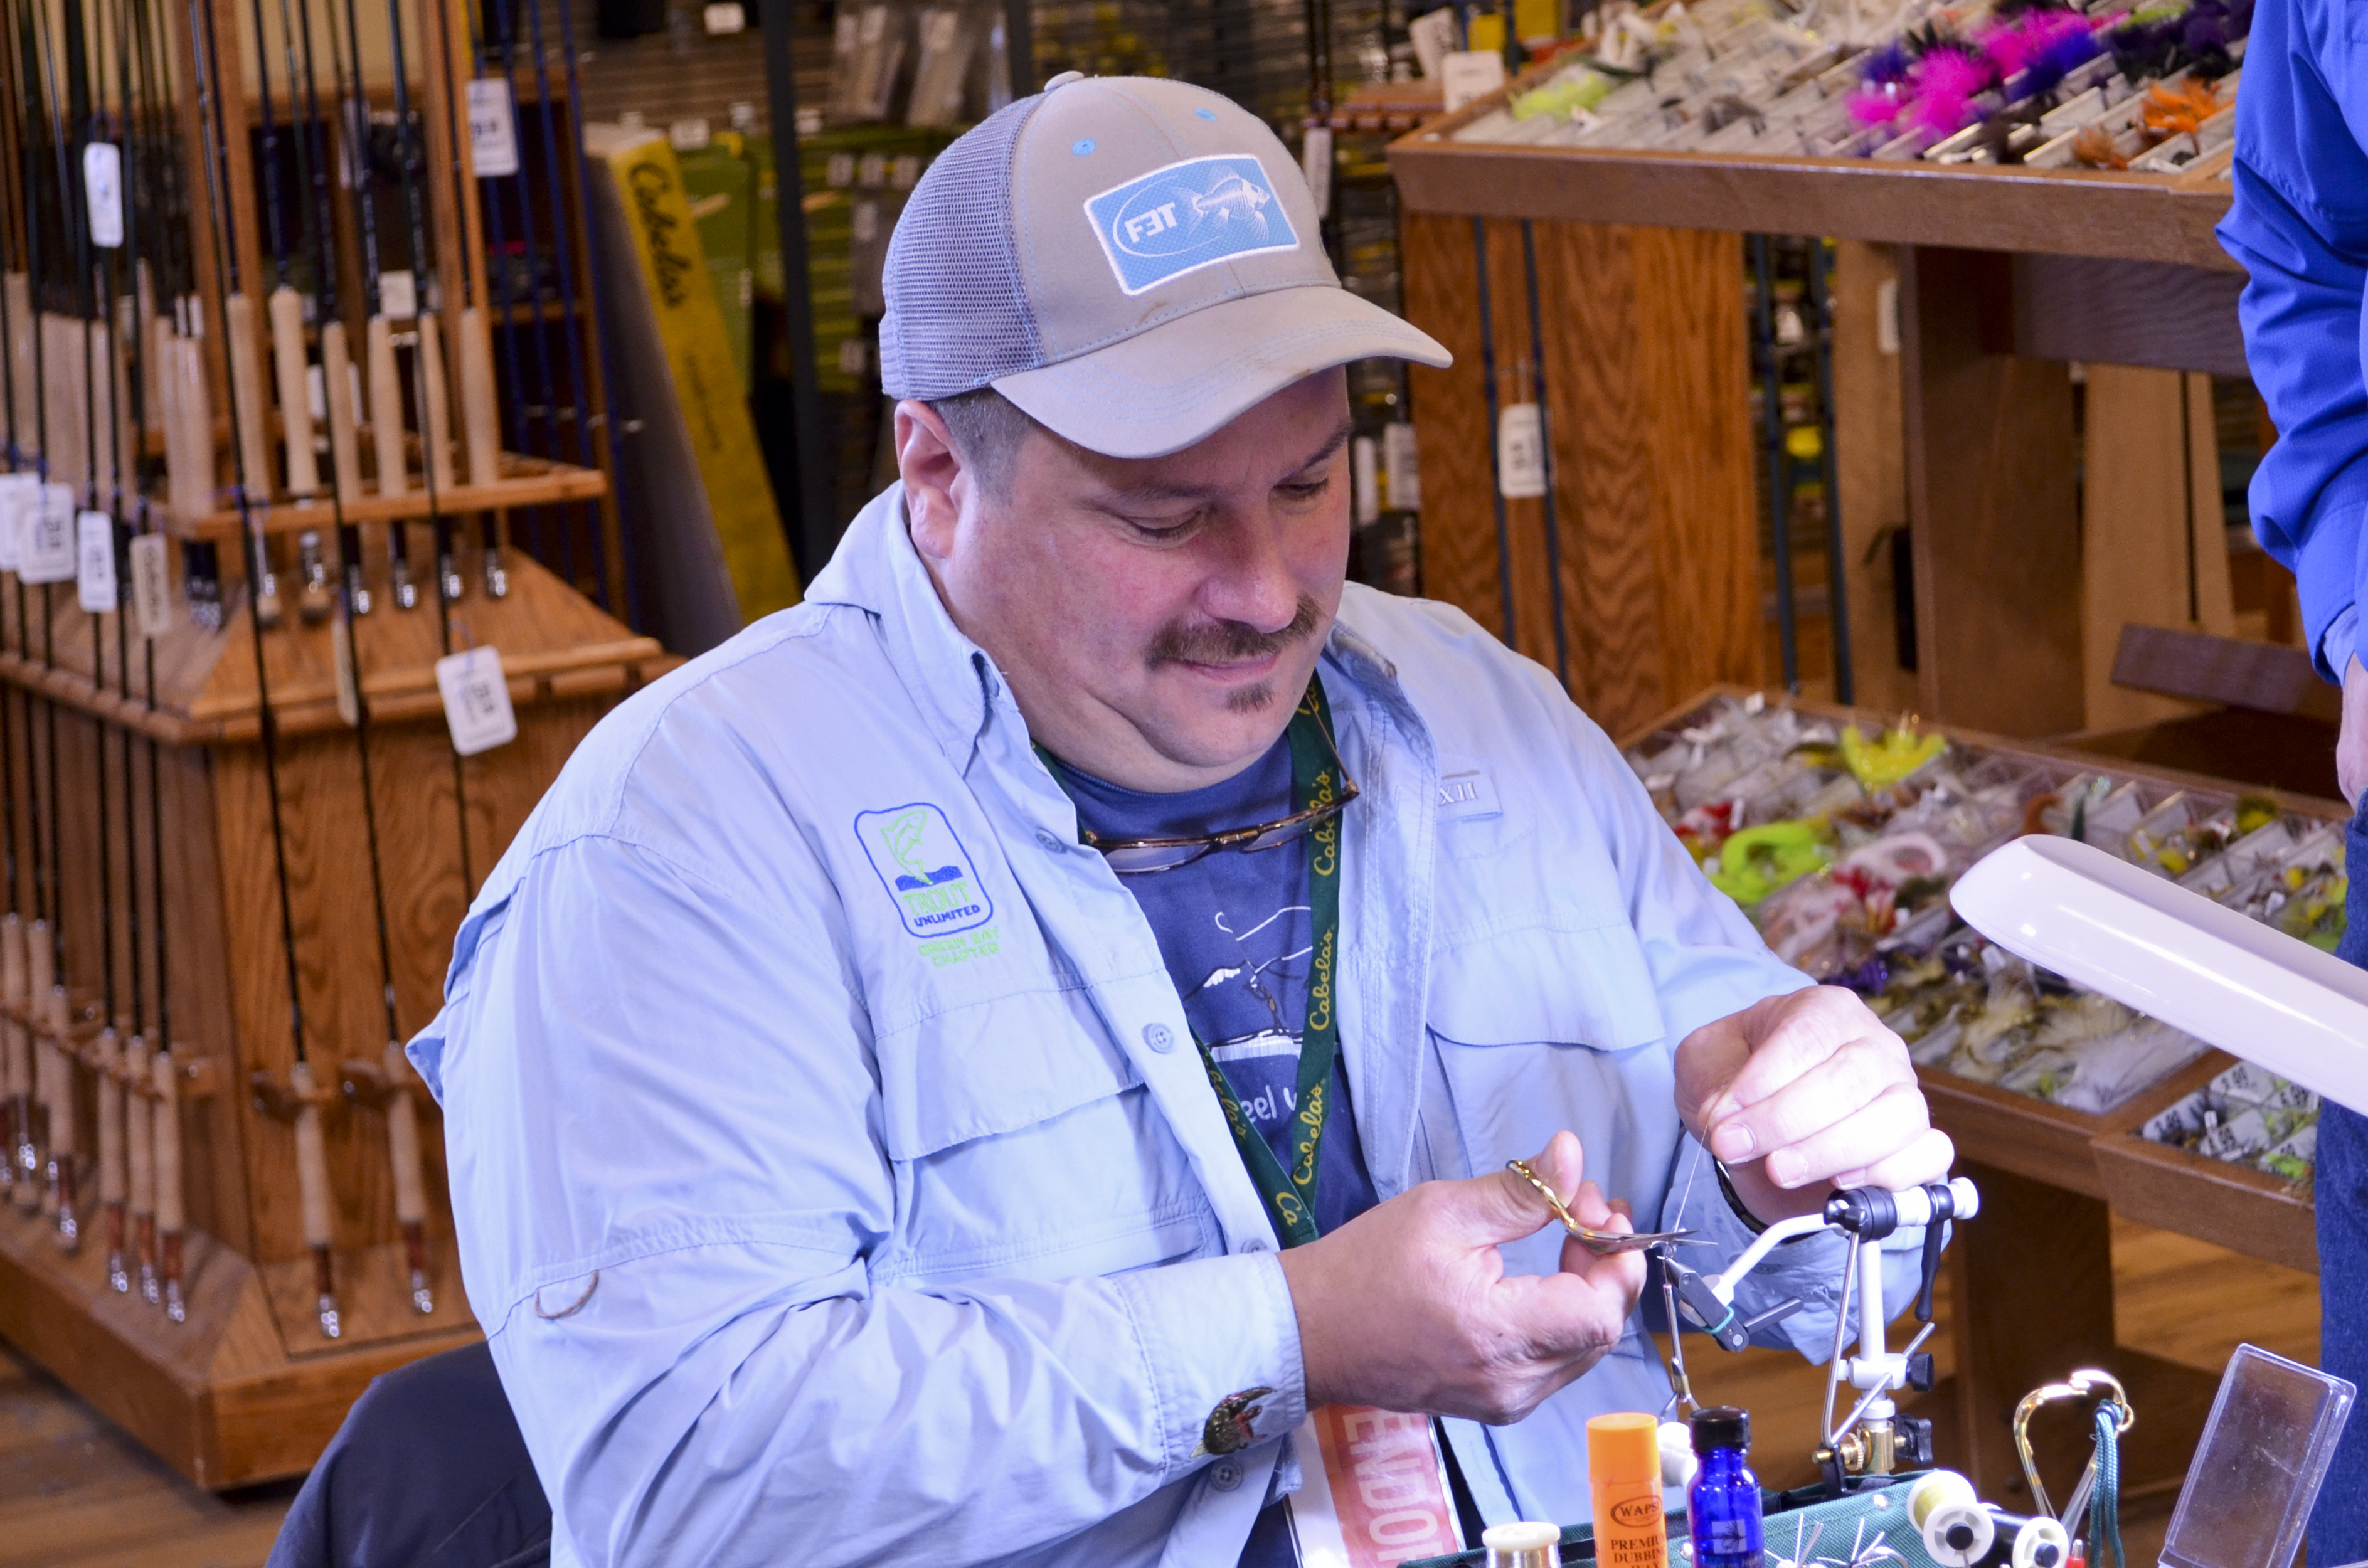 Paul working on one of Jerry's Panfish creations